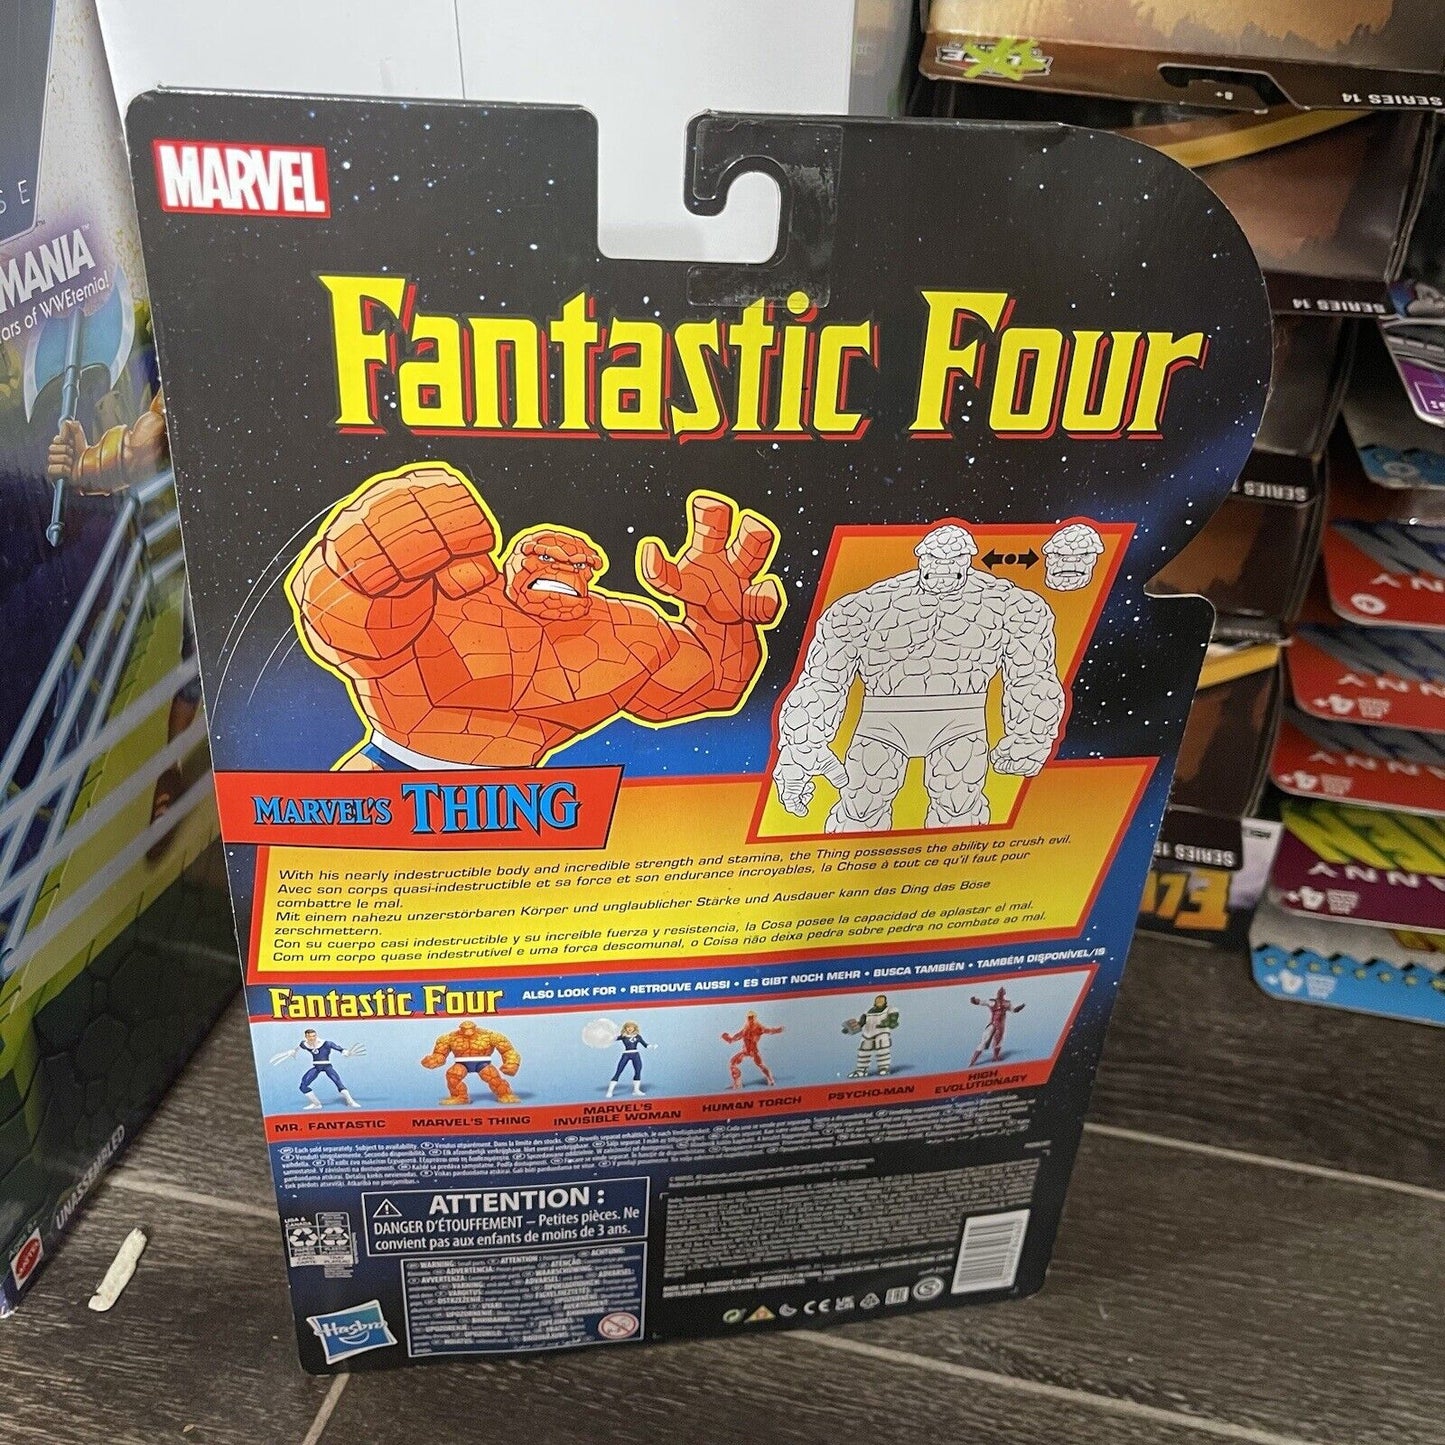 FANTASTIC FOUR RETRO Marvel Legends THING 6-Inch Action Figure - New